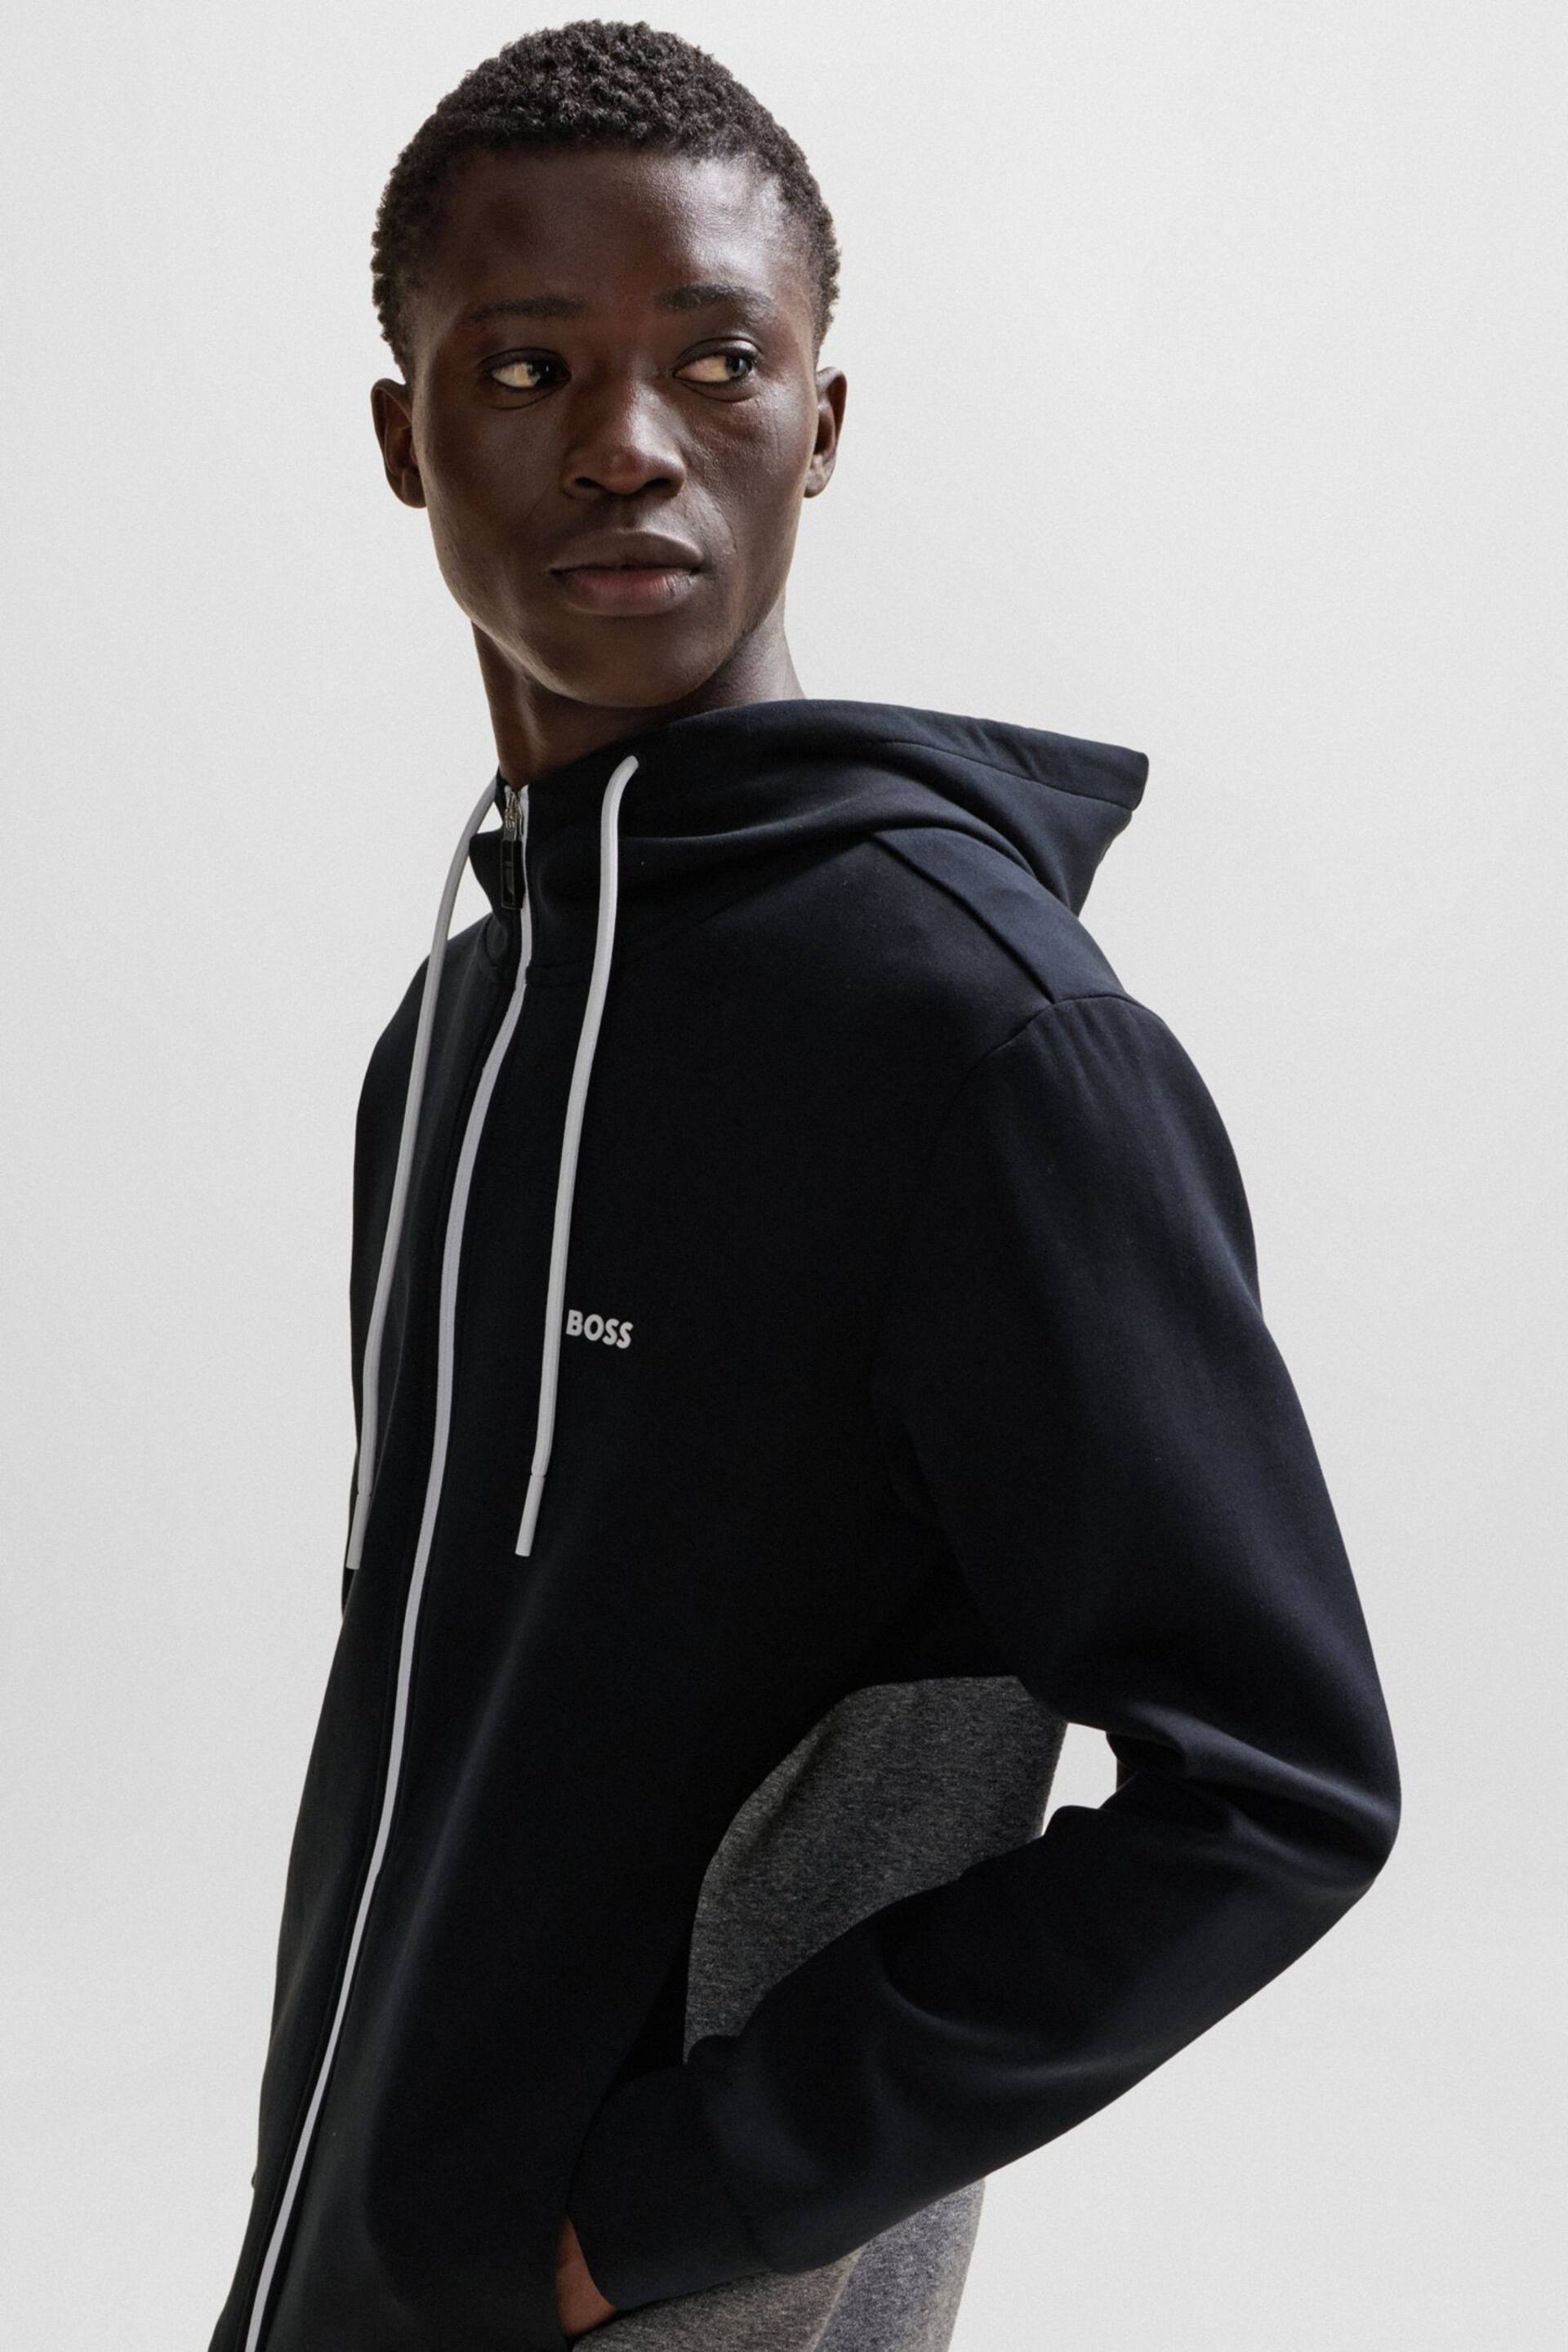 BOSS Black Stretch Cotton Contrast Zip Up Tracksuit Hoodie - Image 4 of 5